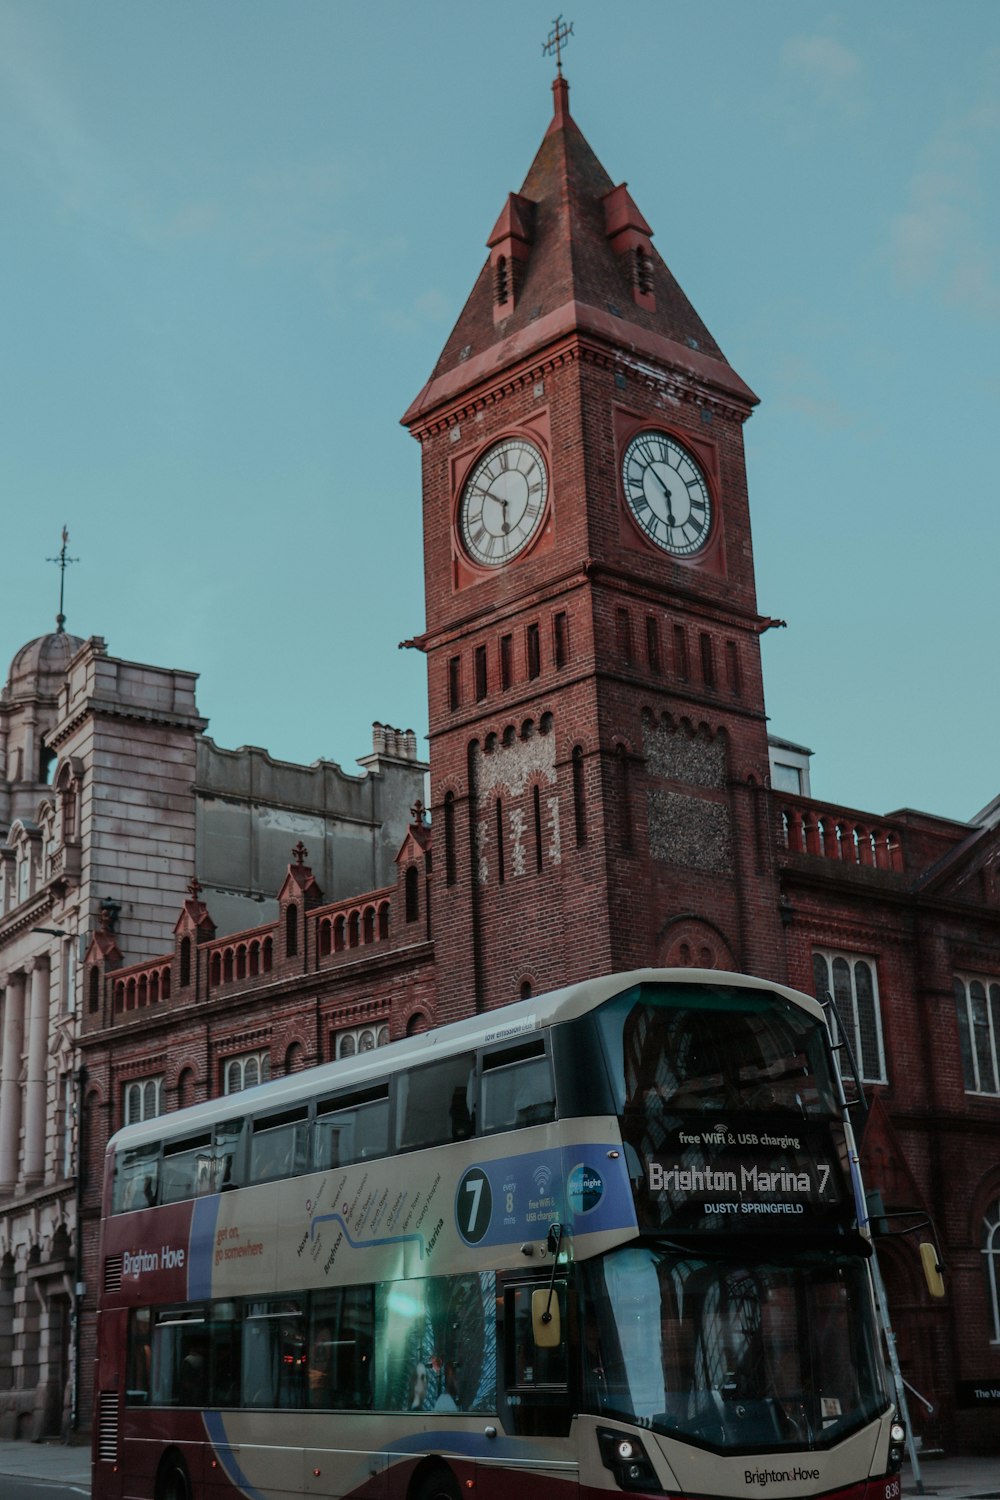 a double decker bus parked in front of a building with a clock tower